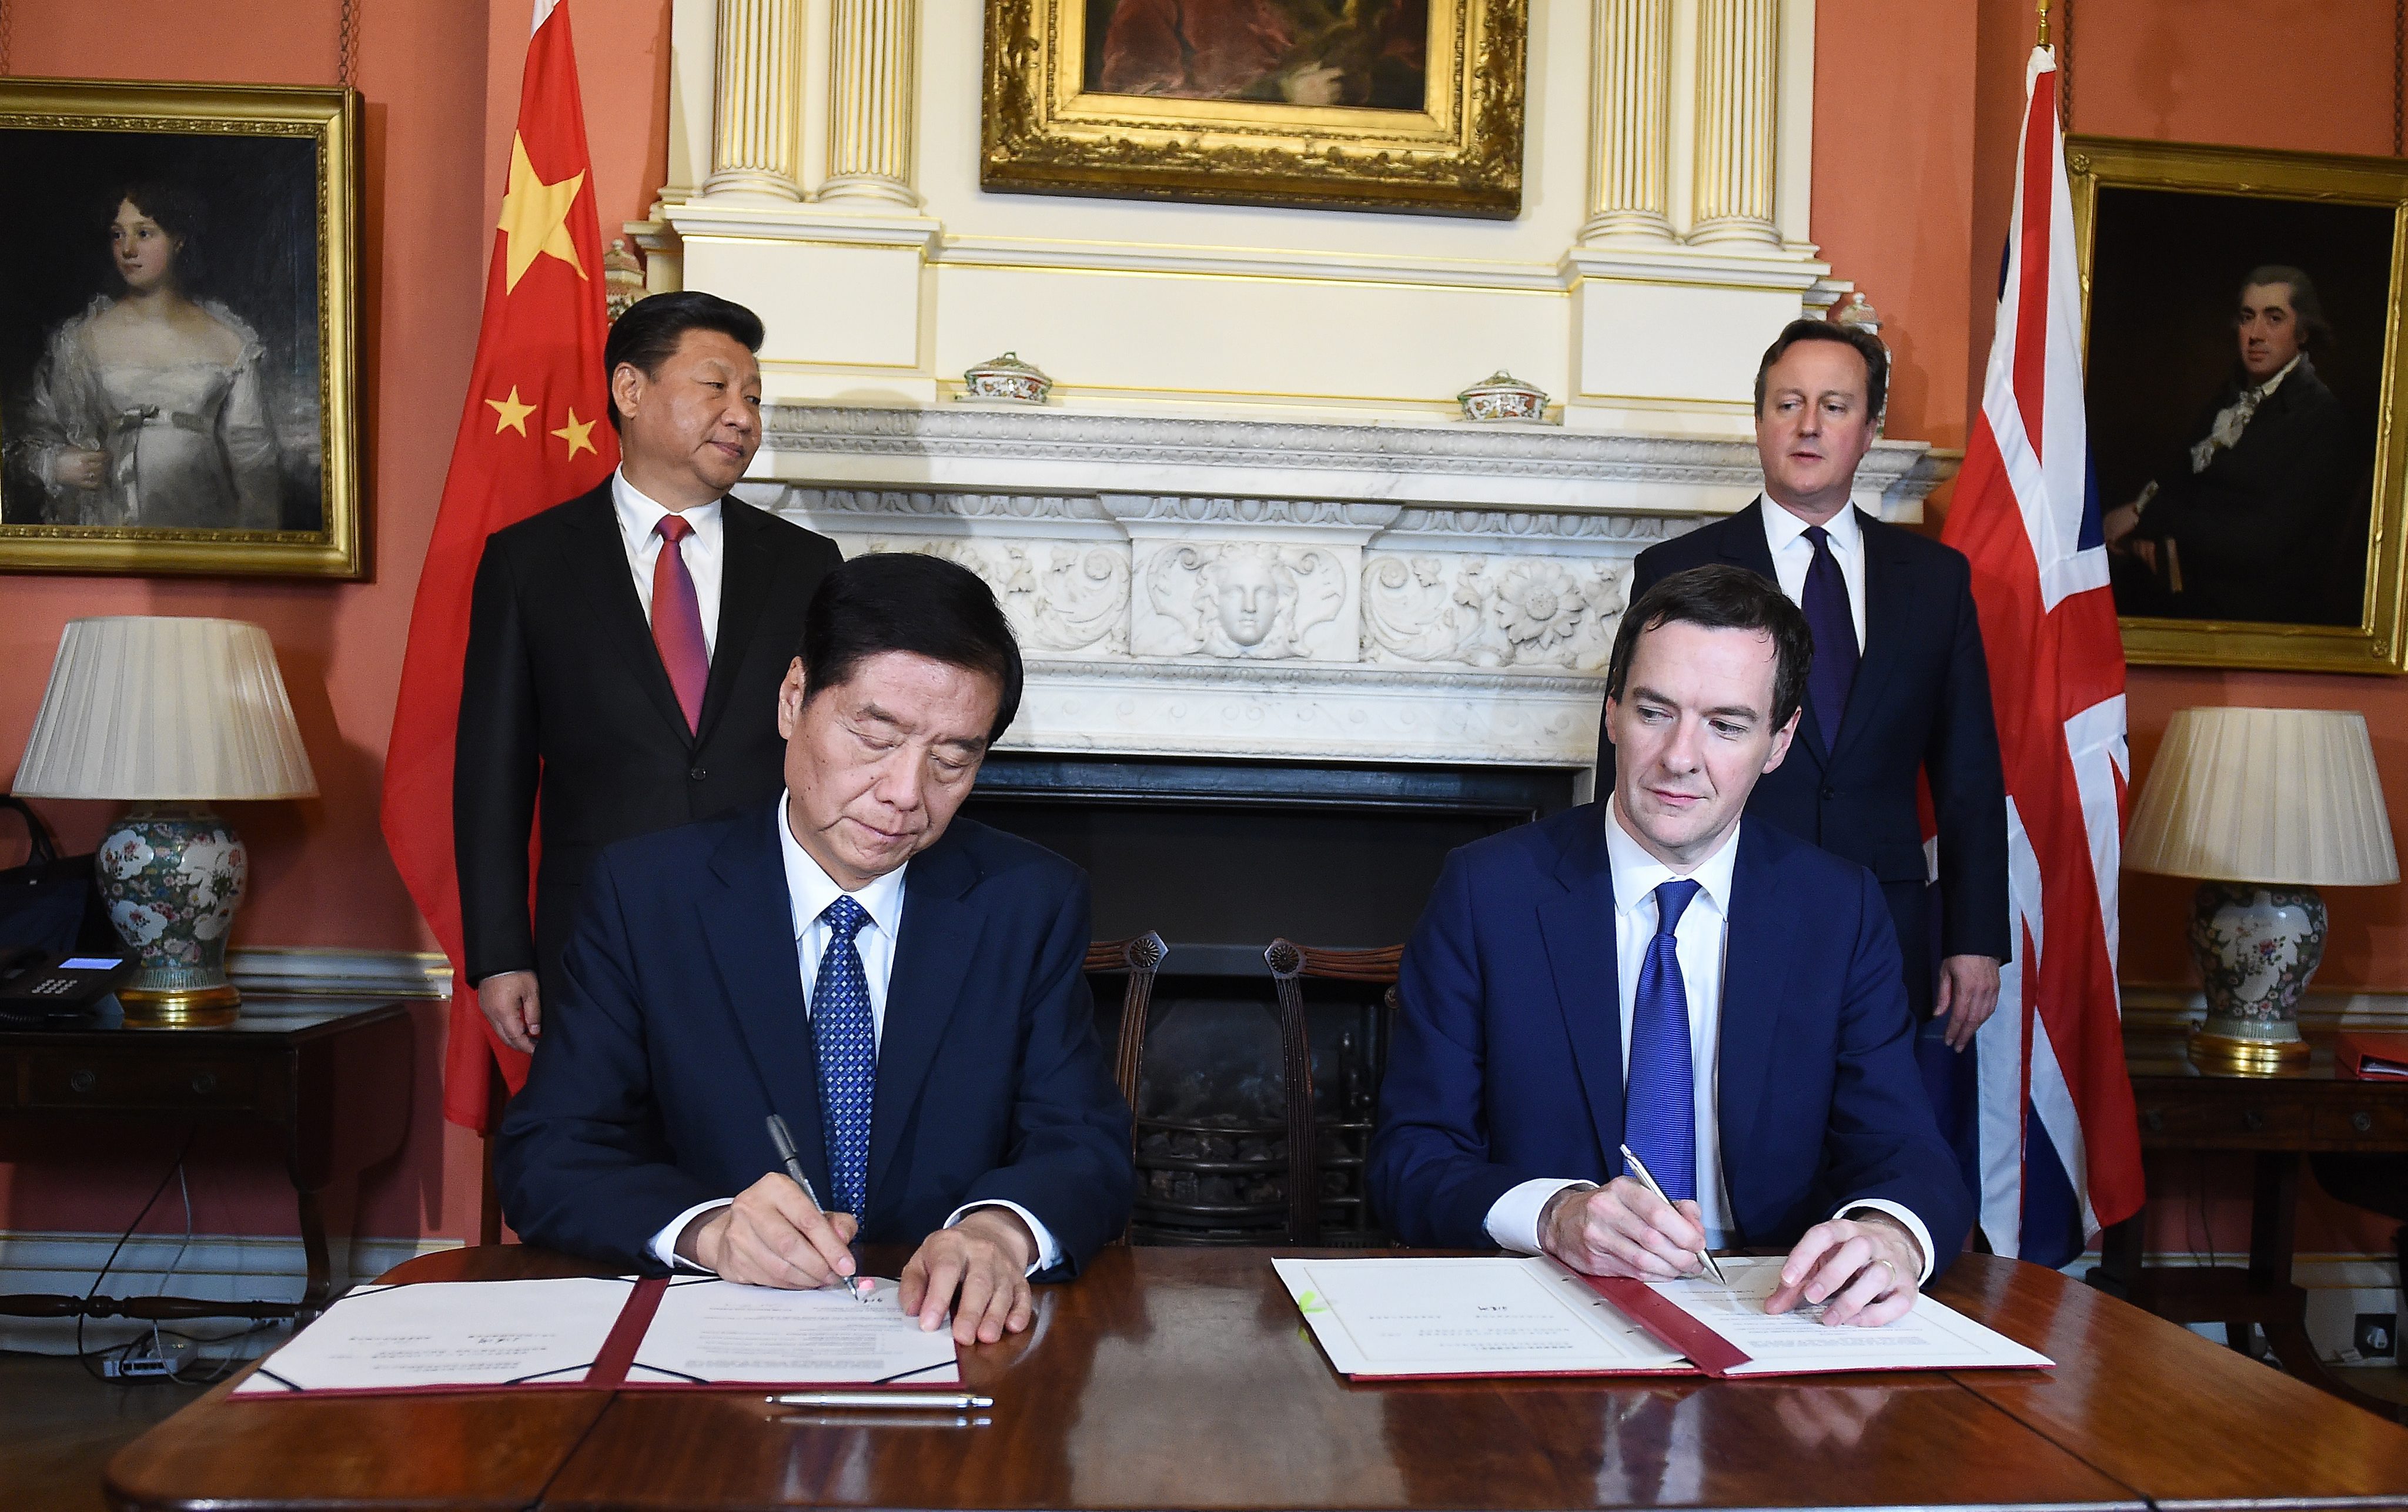 epa04987303 British Chancellor of the Exchequer George Osborne (2-R) Minister of the General Administration of Customs, Yu Guangzhou (2-L) member of the Chinese delegation during a signing ceremony on infrastructure with British Prime Minister David Cameron (R) and Chinese President Xi Jinping (L) at the British Prime Minister's London residence, 10 Downing Street, in central London, Britain, 21 October 2015. President Xi Jinping arrived in Britain on 19 October 2015 for a three-day state visit. This is the first state visit to Britain by a Chinese leader since 2005. EPA/ANDY RAIN / POOL REPEAT TRANSMISSION: ADDING OF CHINESE DELGATION MEMBER